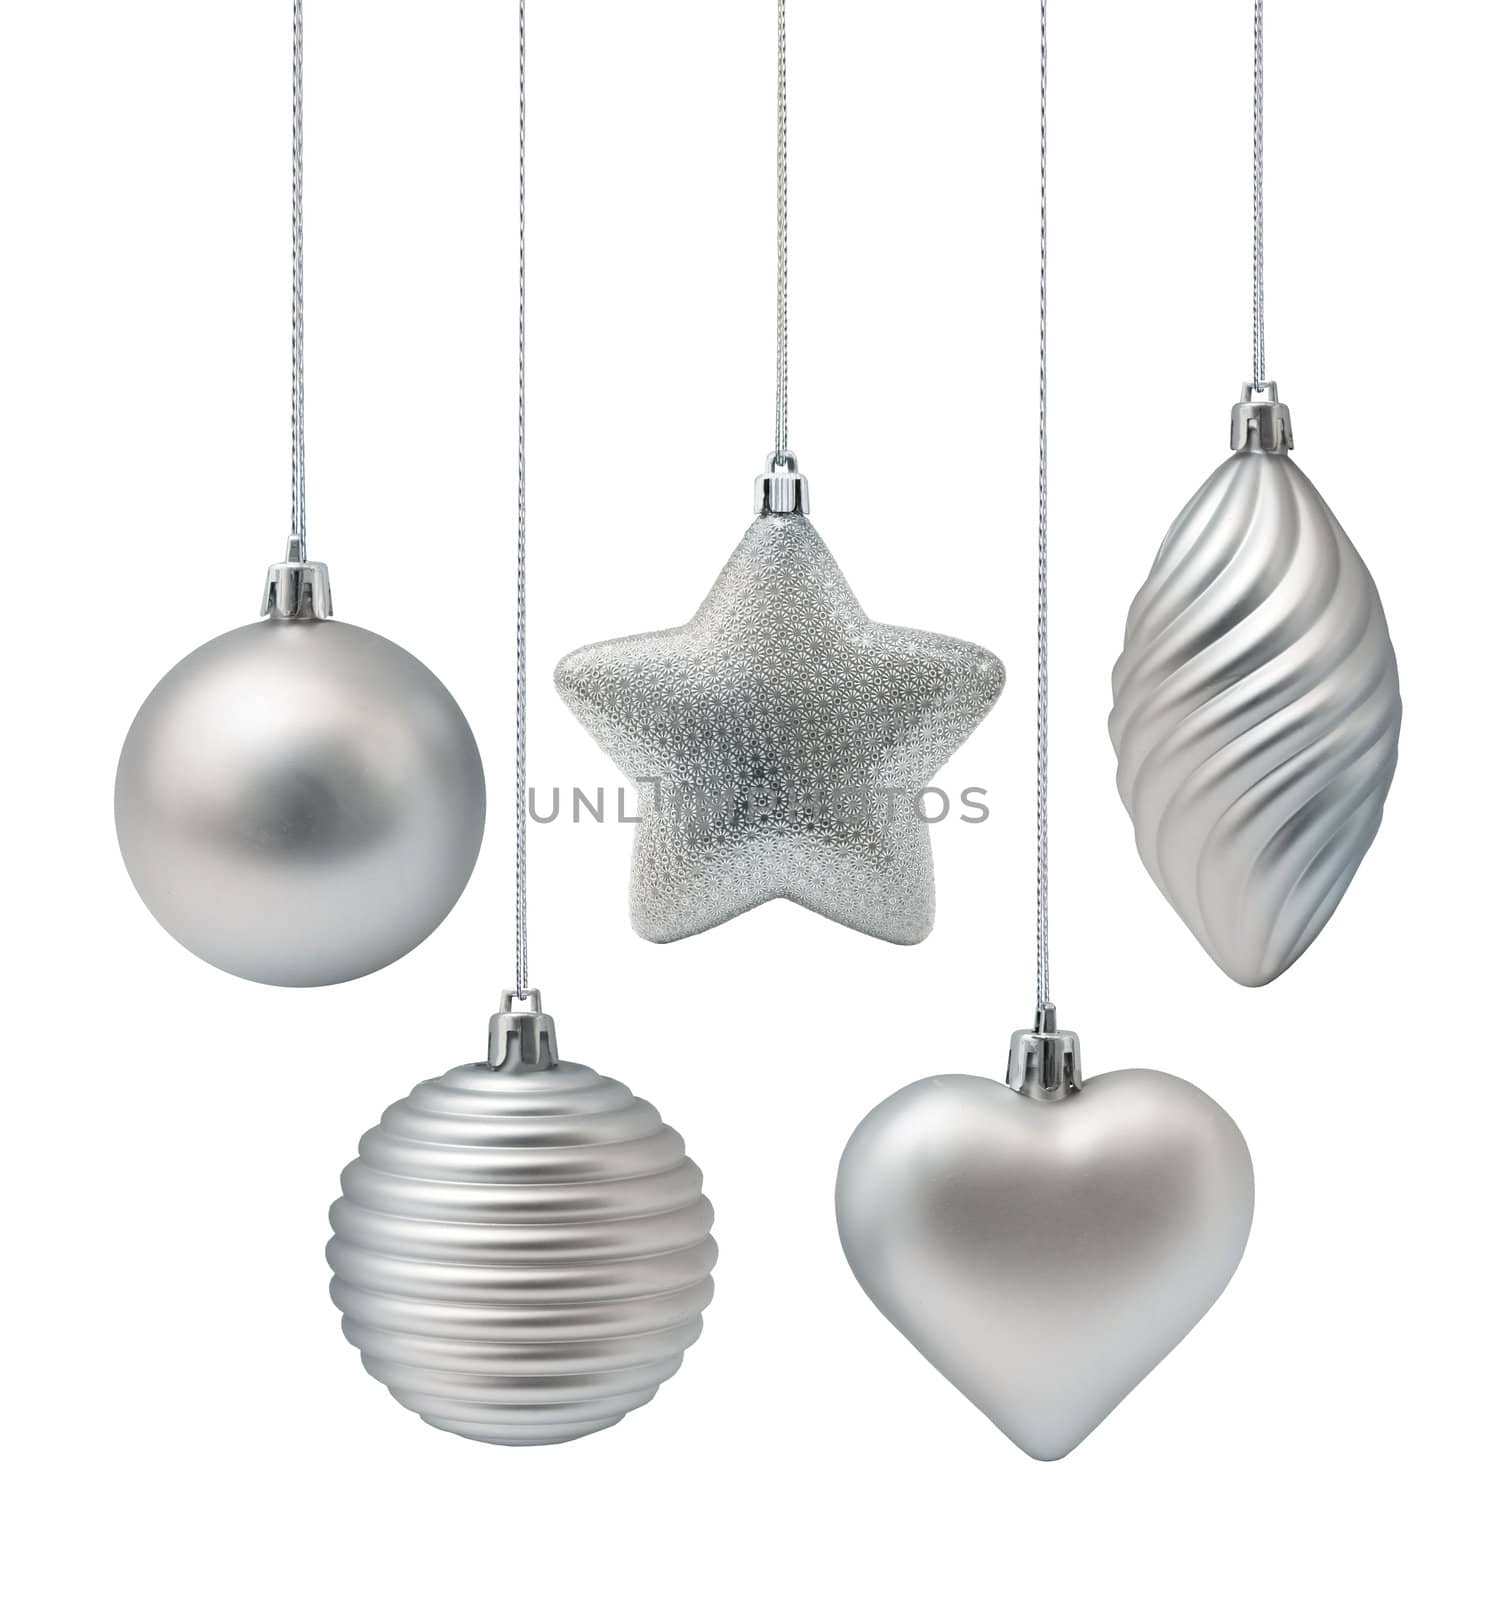 Silver Christmas decoration elements isolated on white background